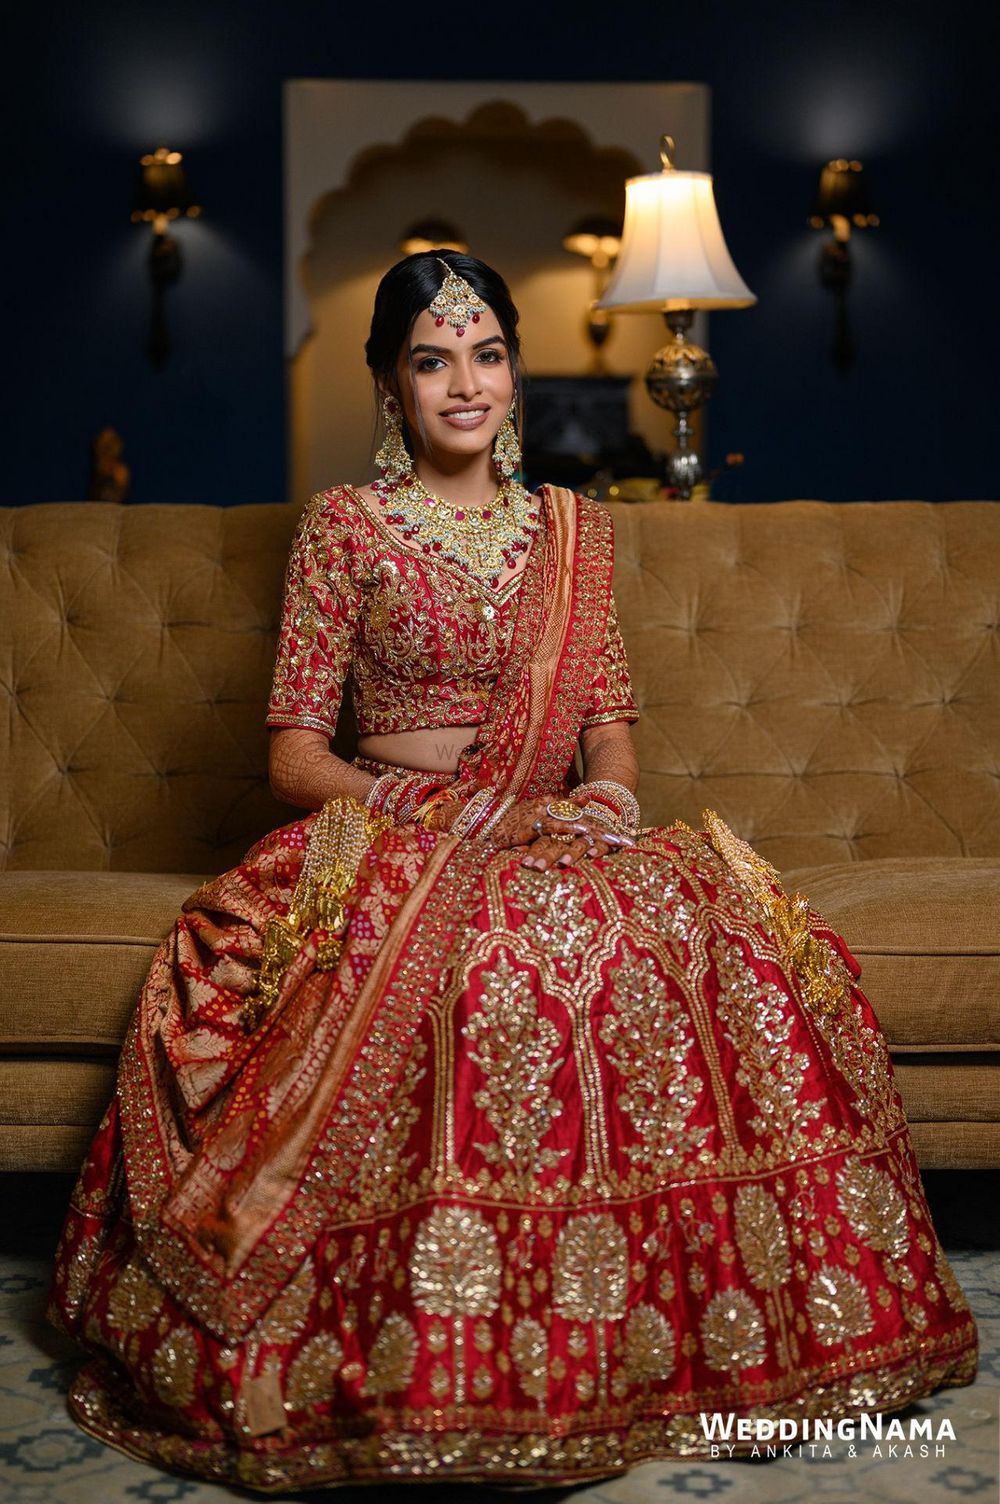 Photo of bride wearing a regal red and gold lehenga